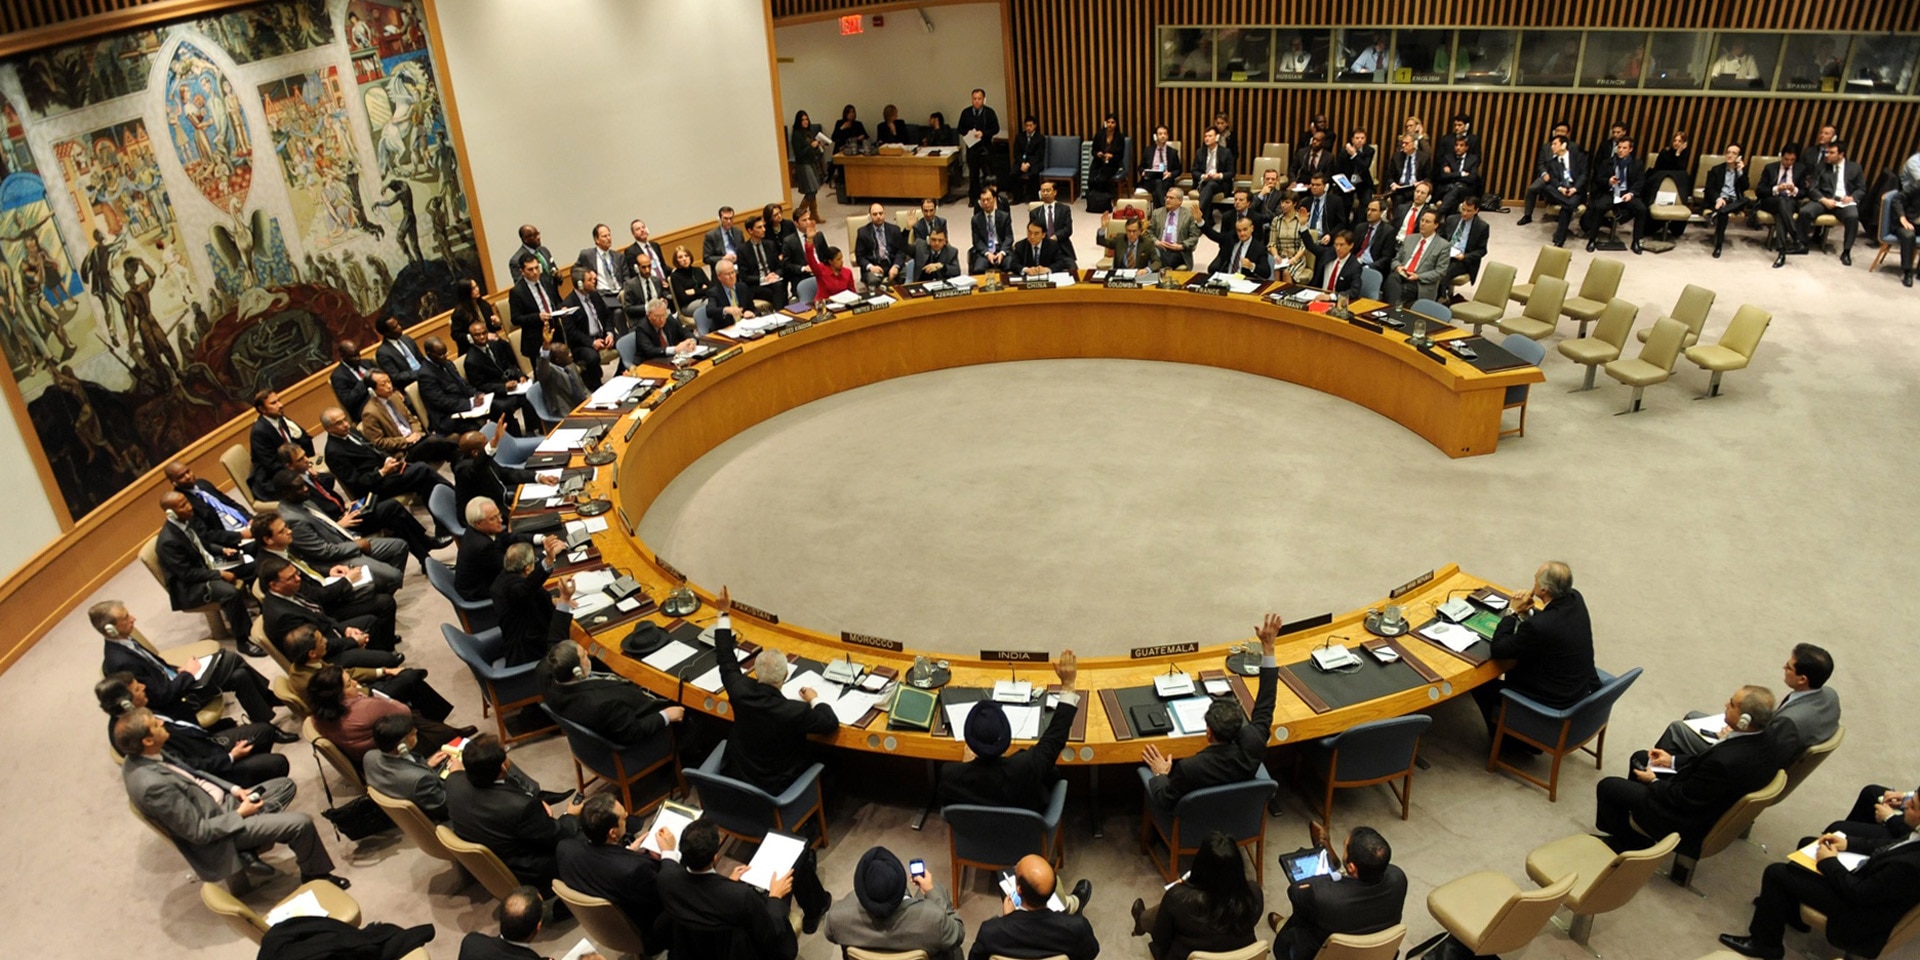 The member states of the UN Security Council vote on a resolution.